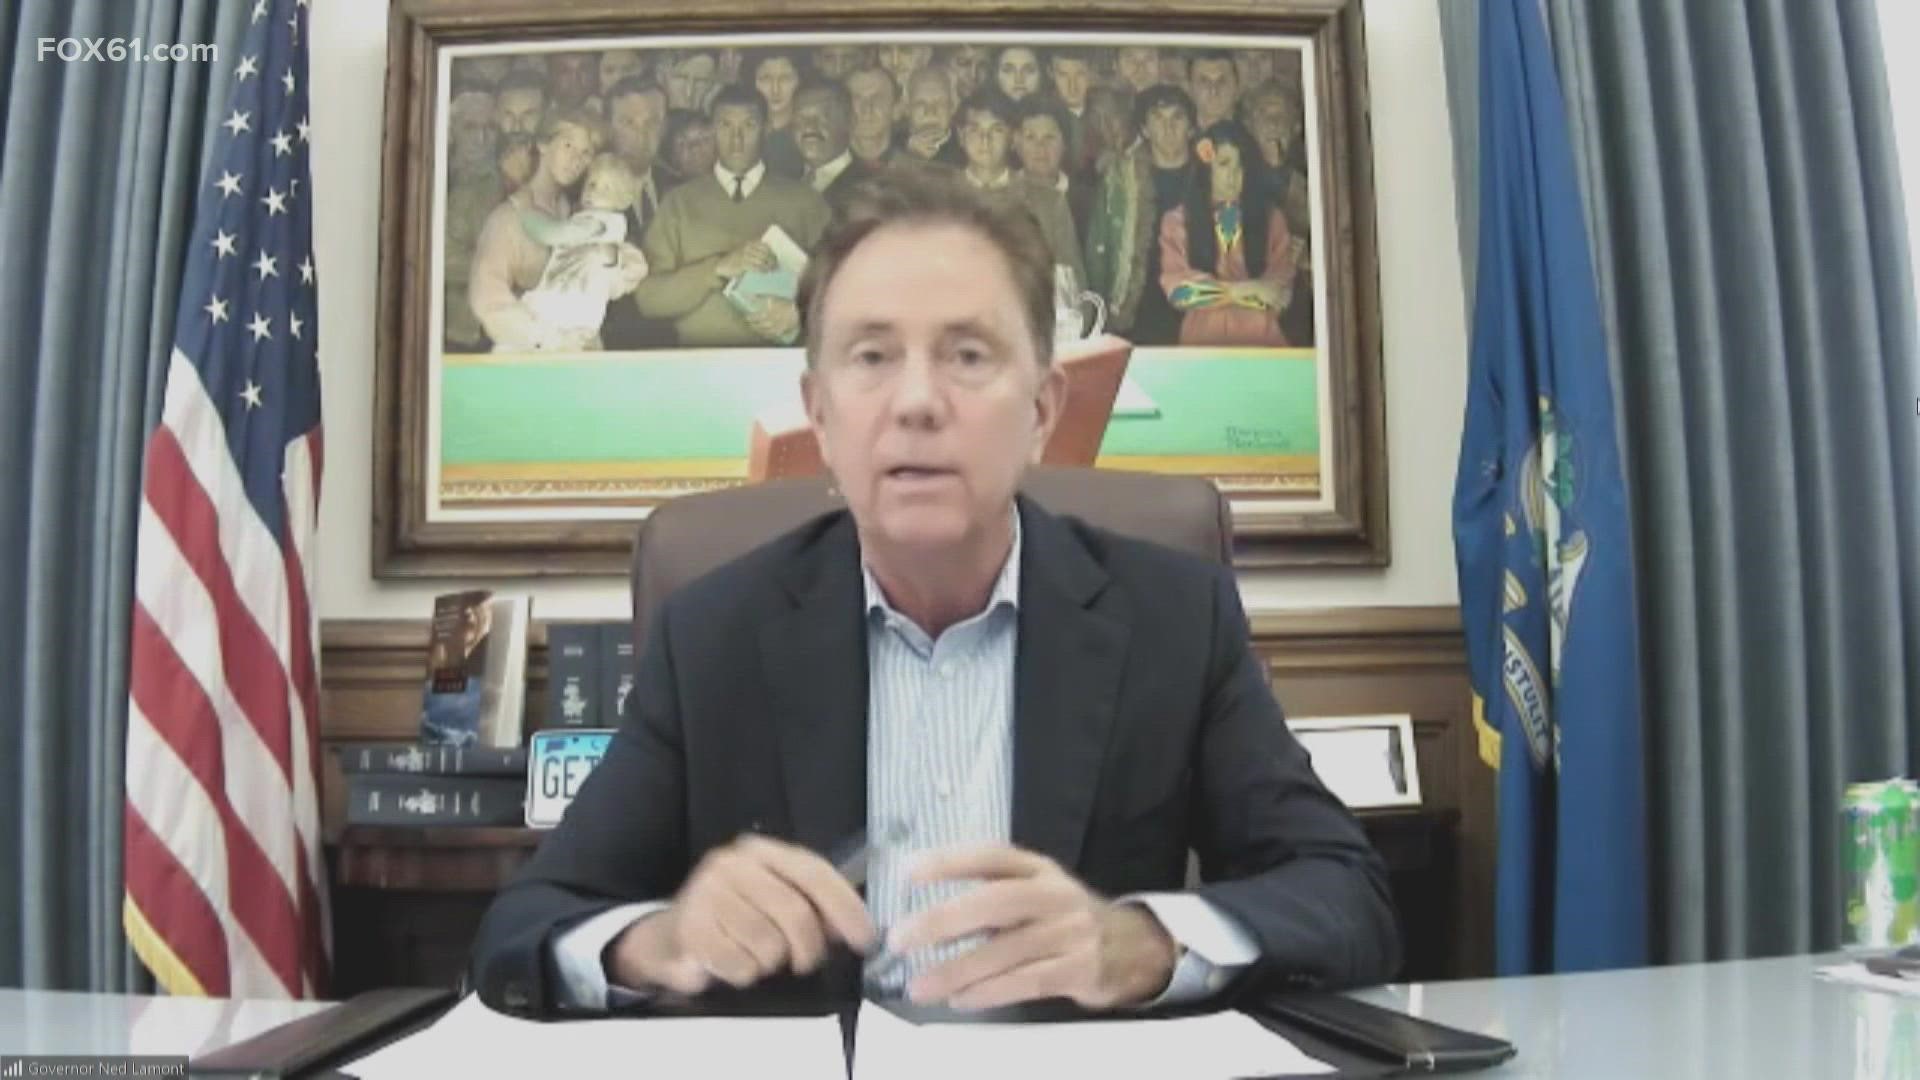 According to Gov. Ned Lamont, 96% of state employees were compliant with the vaccine mandate as of Wednesday evening.